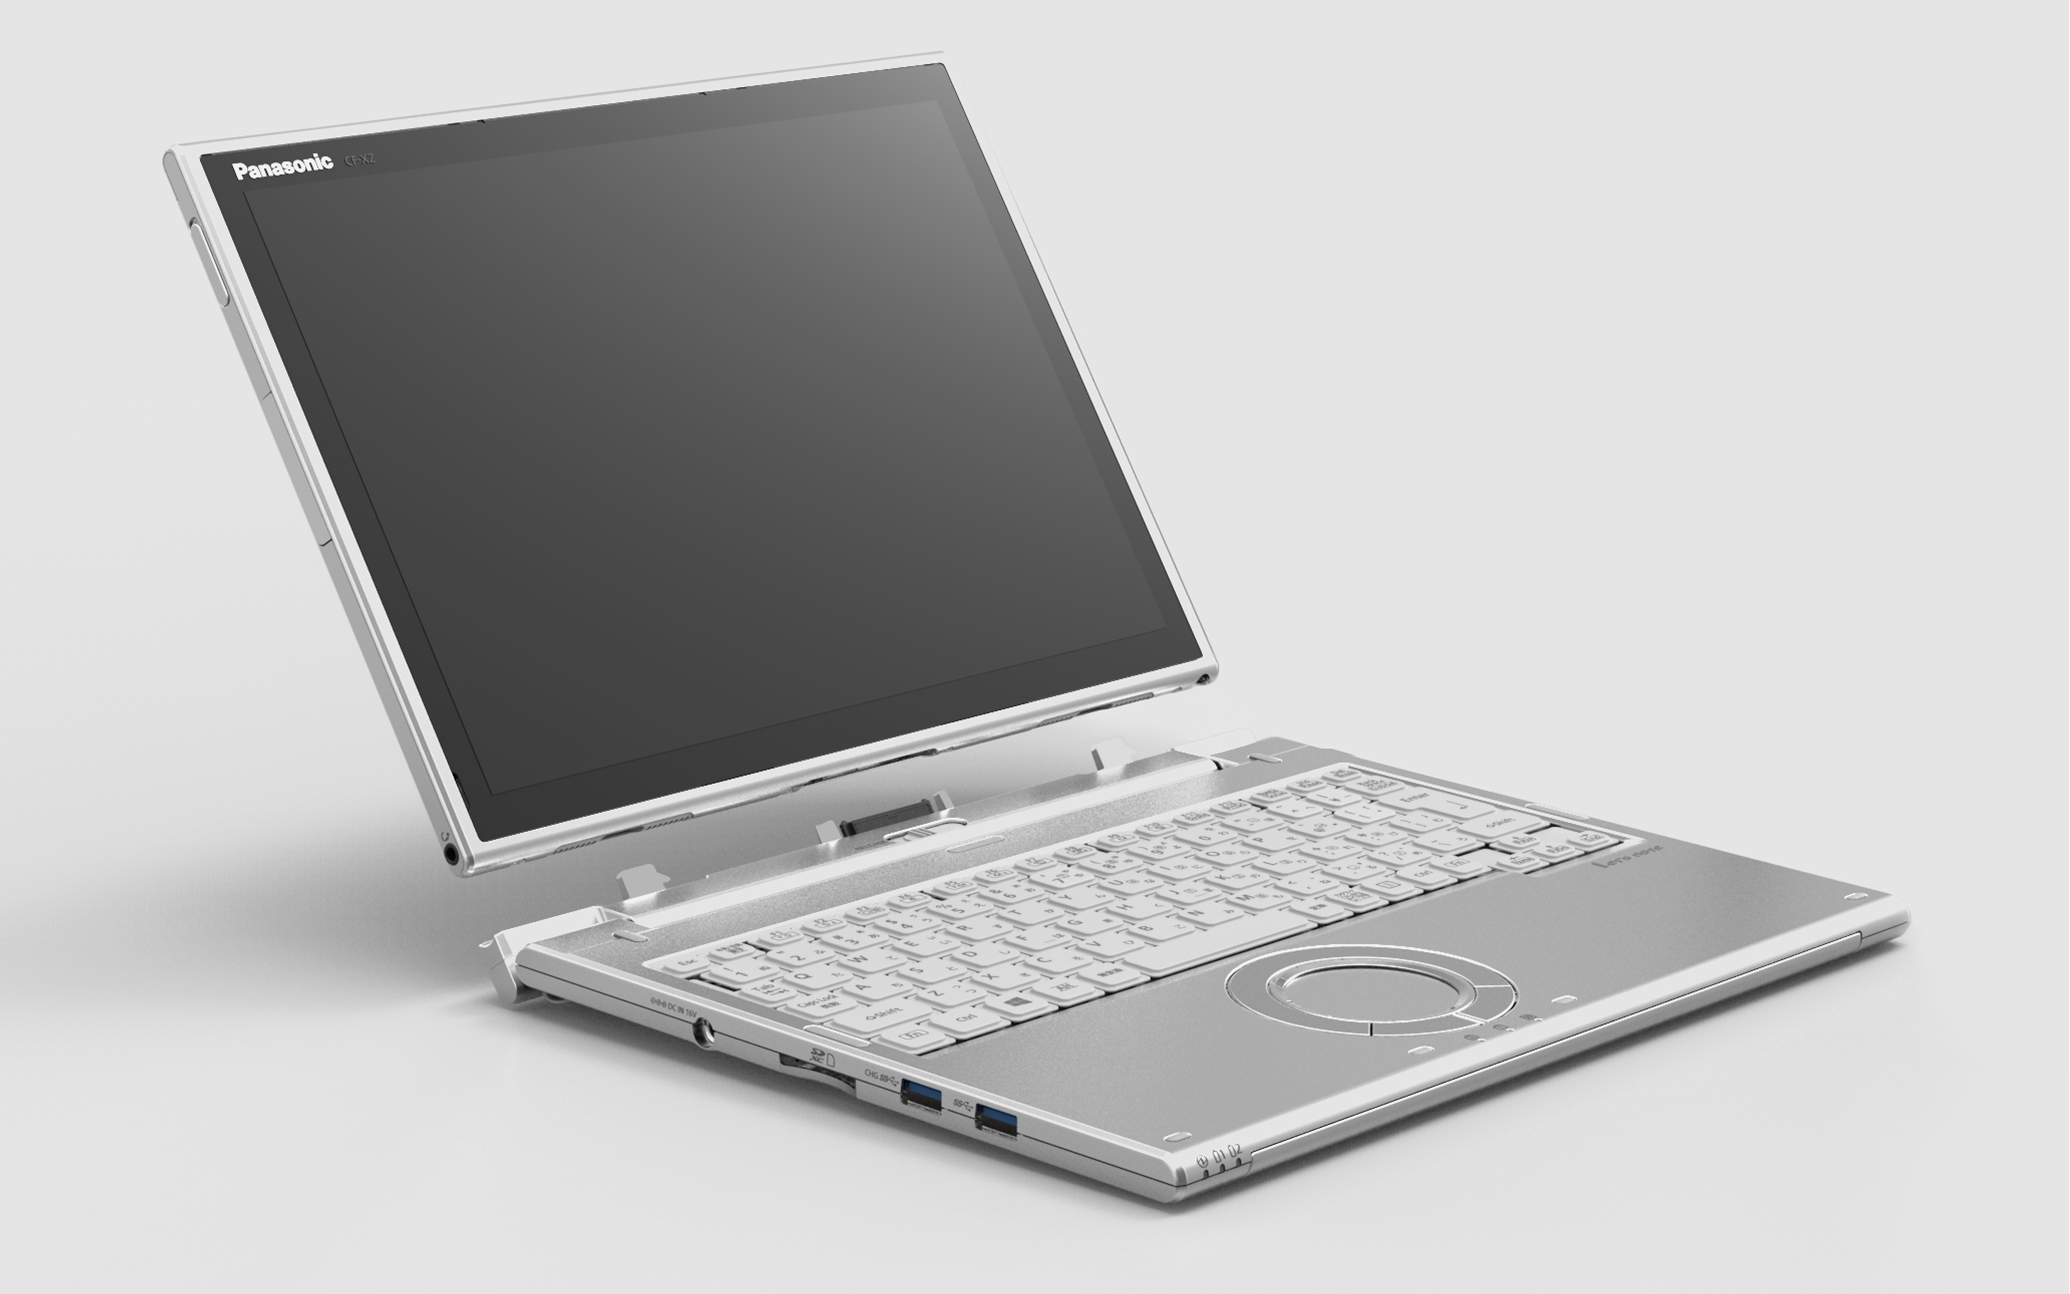 Photo showing the TOUGHBOOK's screen detached from the keyboard